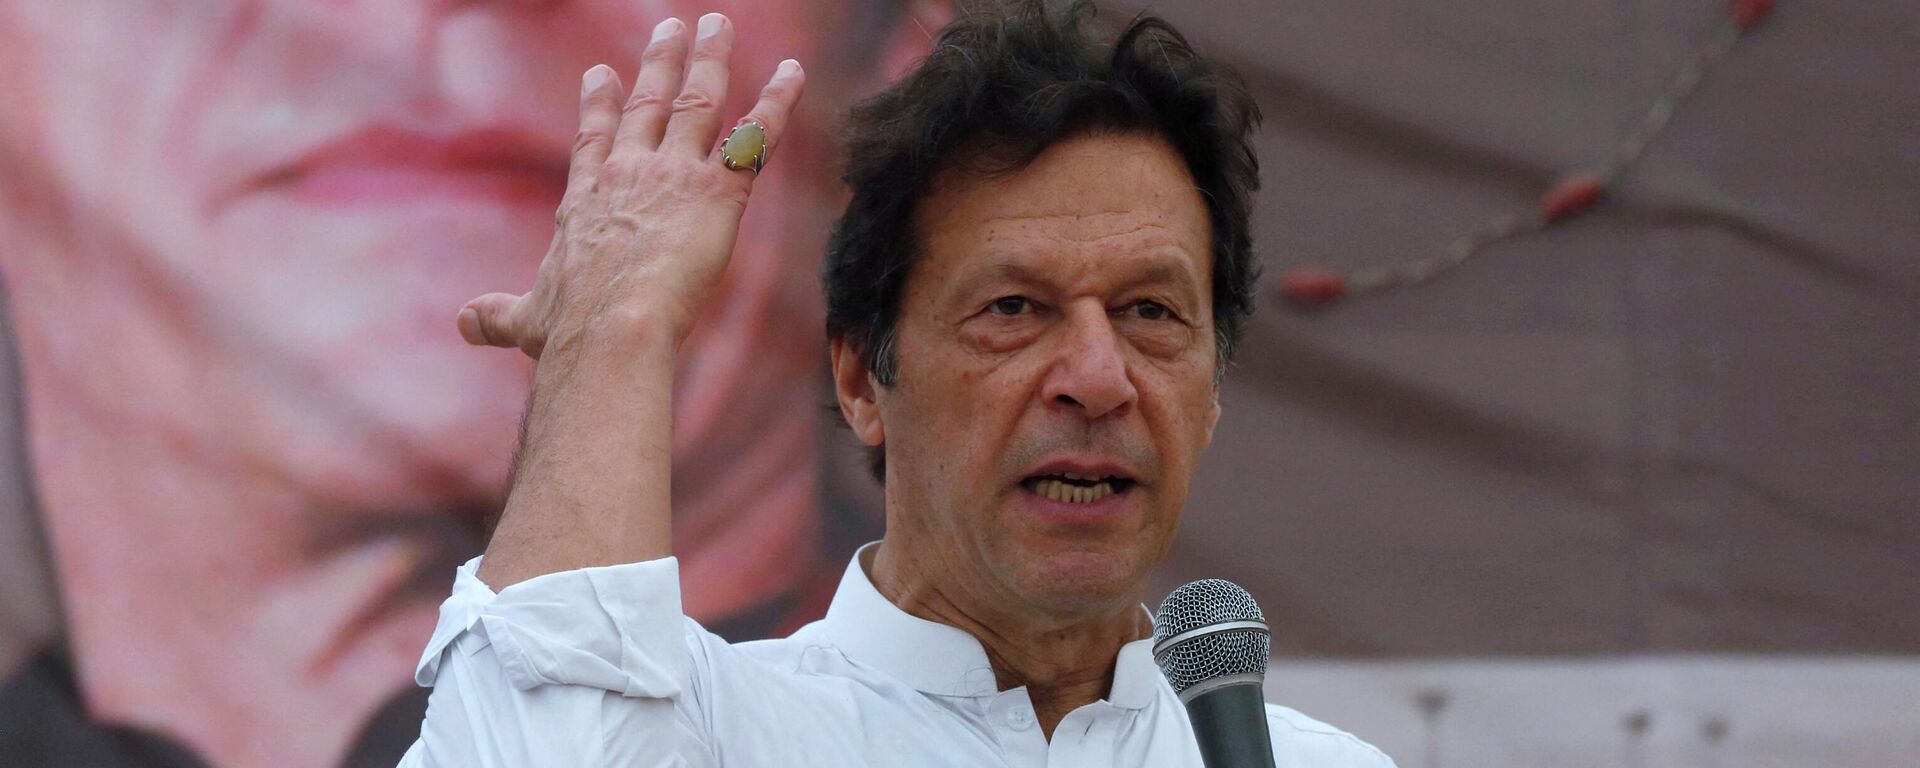 FILE PHOTO: Imran Khan, chairman of the Pakistan Tehreek-e-Insaf (PTI), gestures while addressing his supporters during a campaign meeting ahead of general elections in Karachi, Pakistan, July 4, 2018.  - Sputnik International, 1920, 05.04.2022